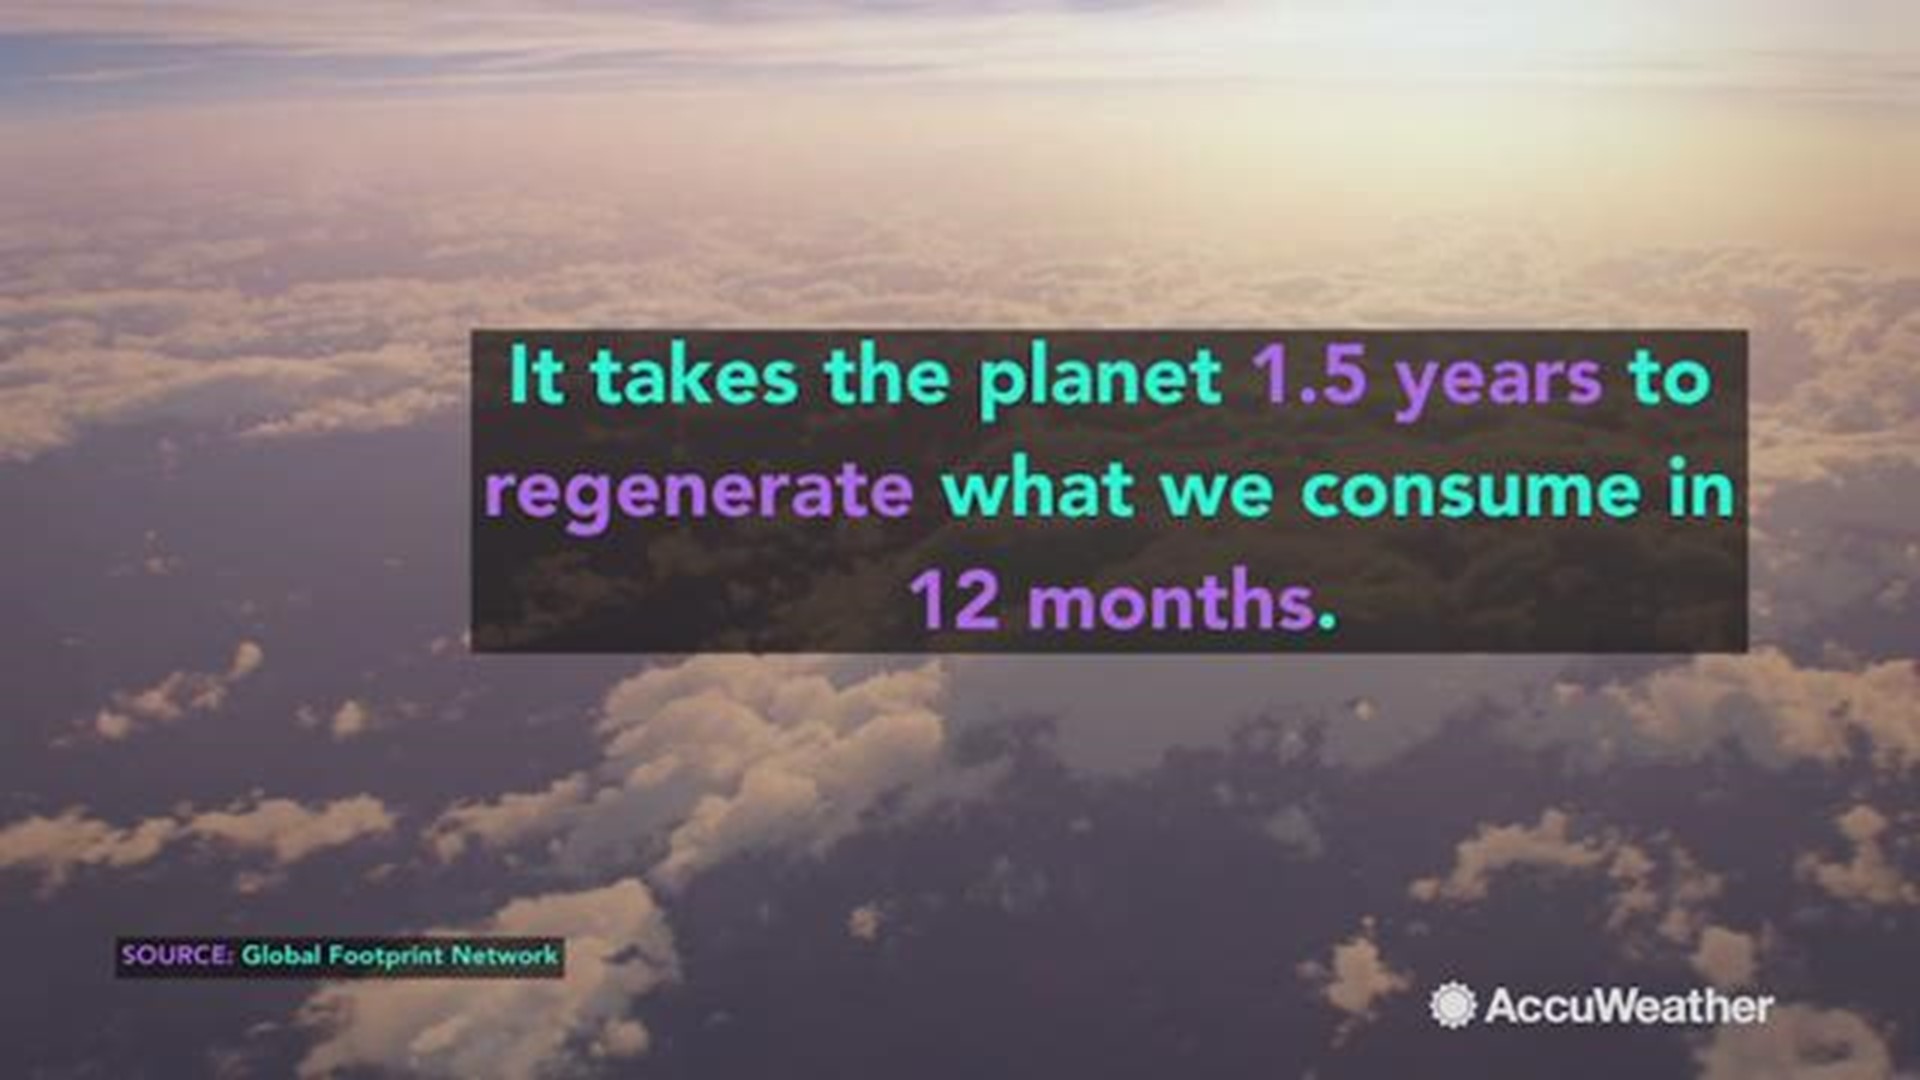 Aug. 1, 2018, marks the earliest Earth Overshoot Day ever. It would take 1.7 Earths to support our natural resource consumption level, according to the Global Footprint Network.